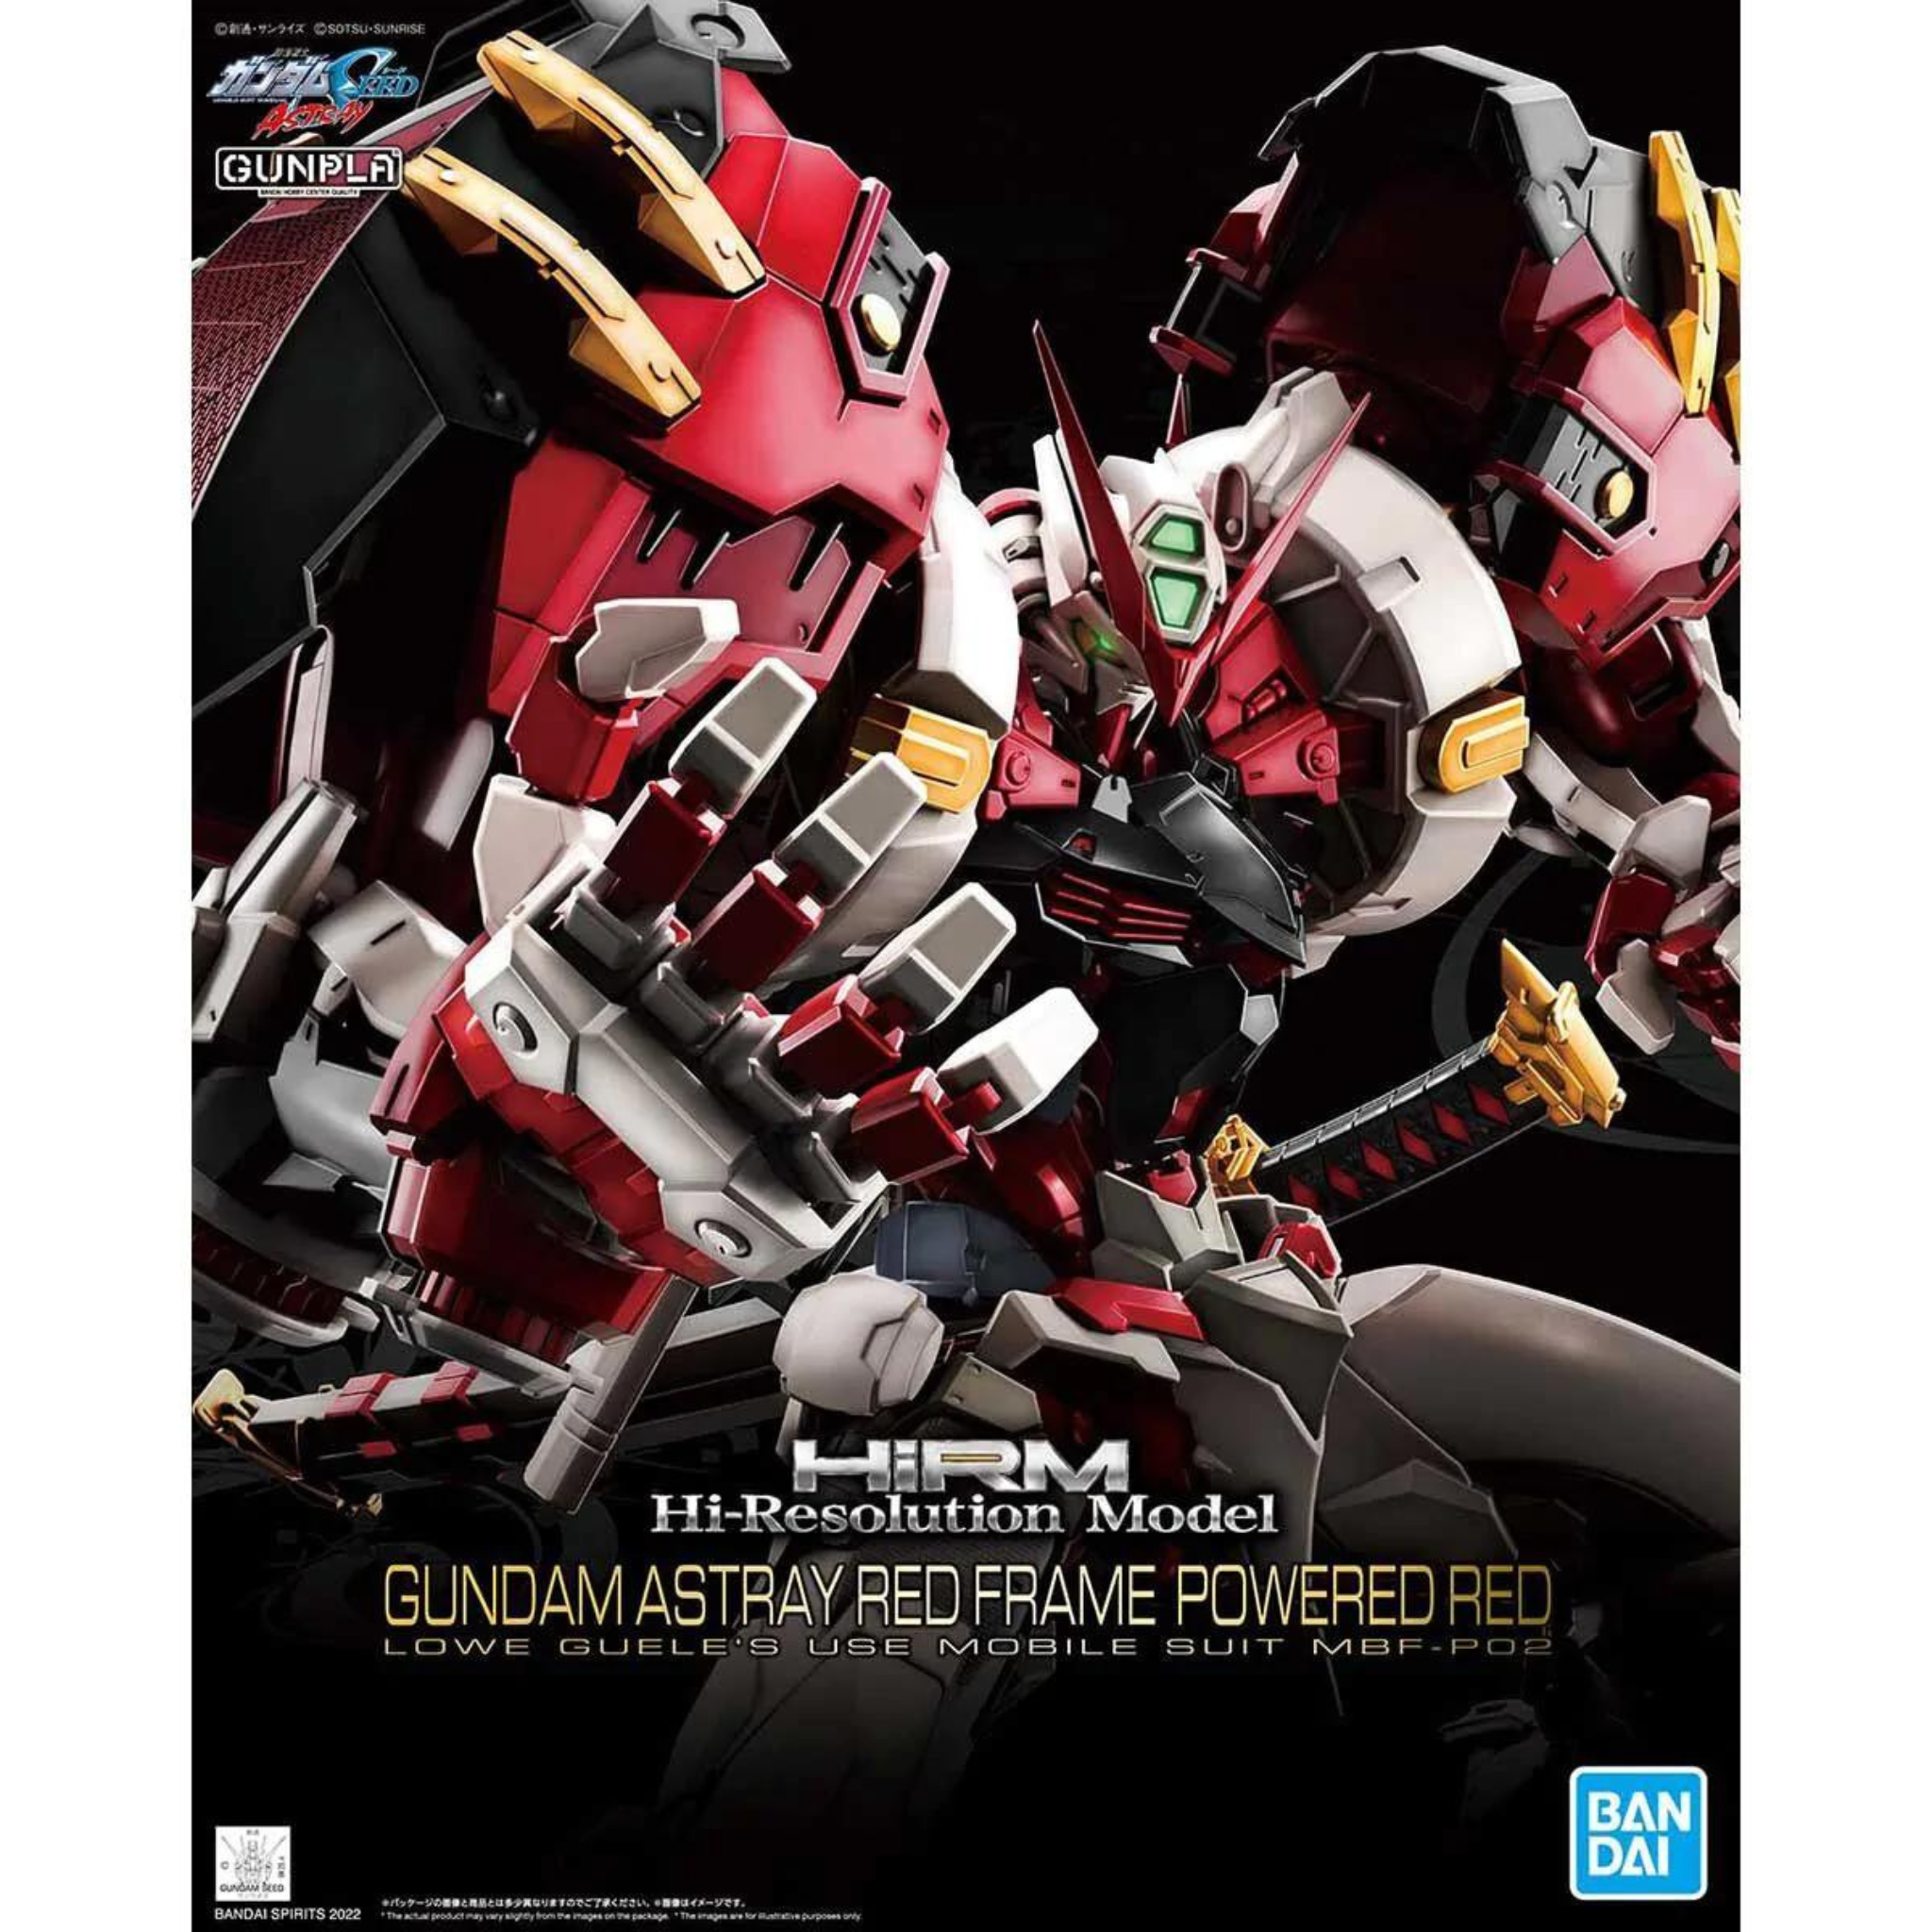 HiRM 1/100 Gundam Astray Red Frame (Powered Red) #502069 by Bandai